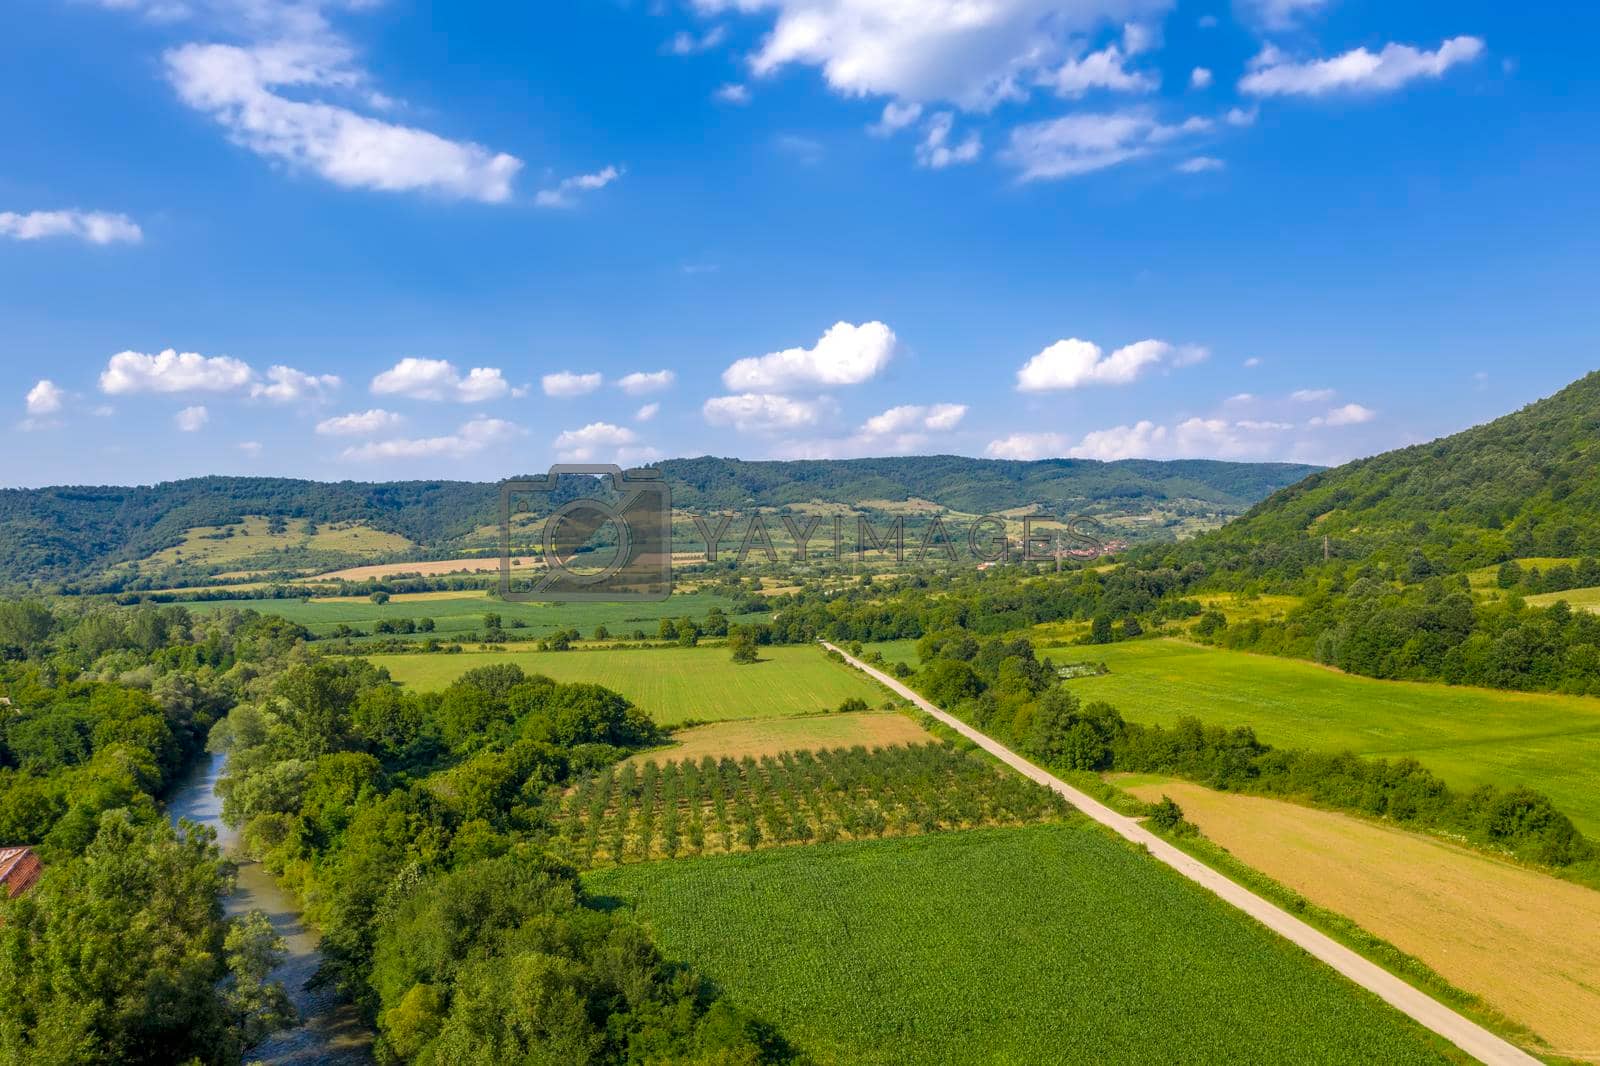 Aerial view from drone of the vast green landscape with river and hills